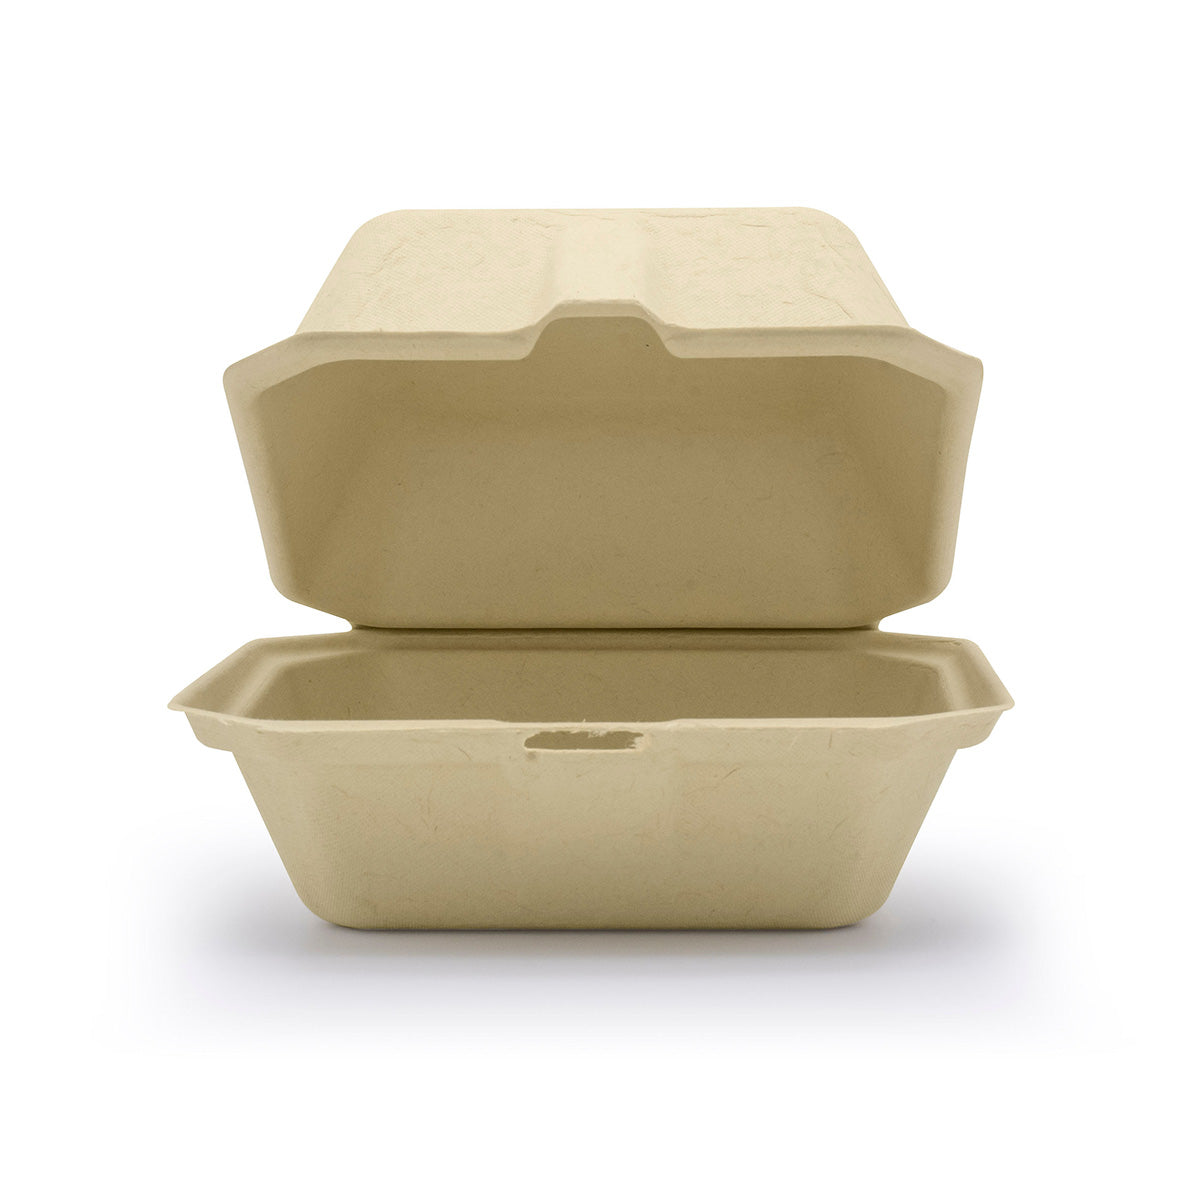 6" x 6" Compostable Clamshell | 1 Compartment | No PFAS Added